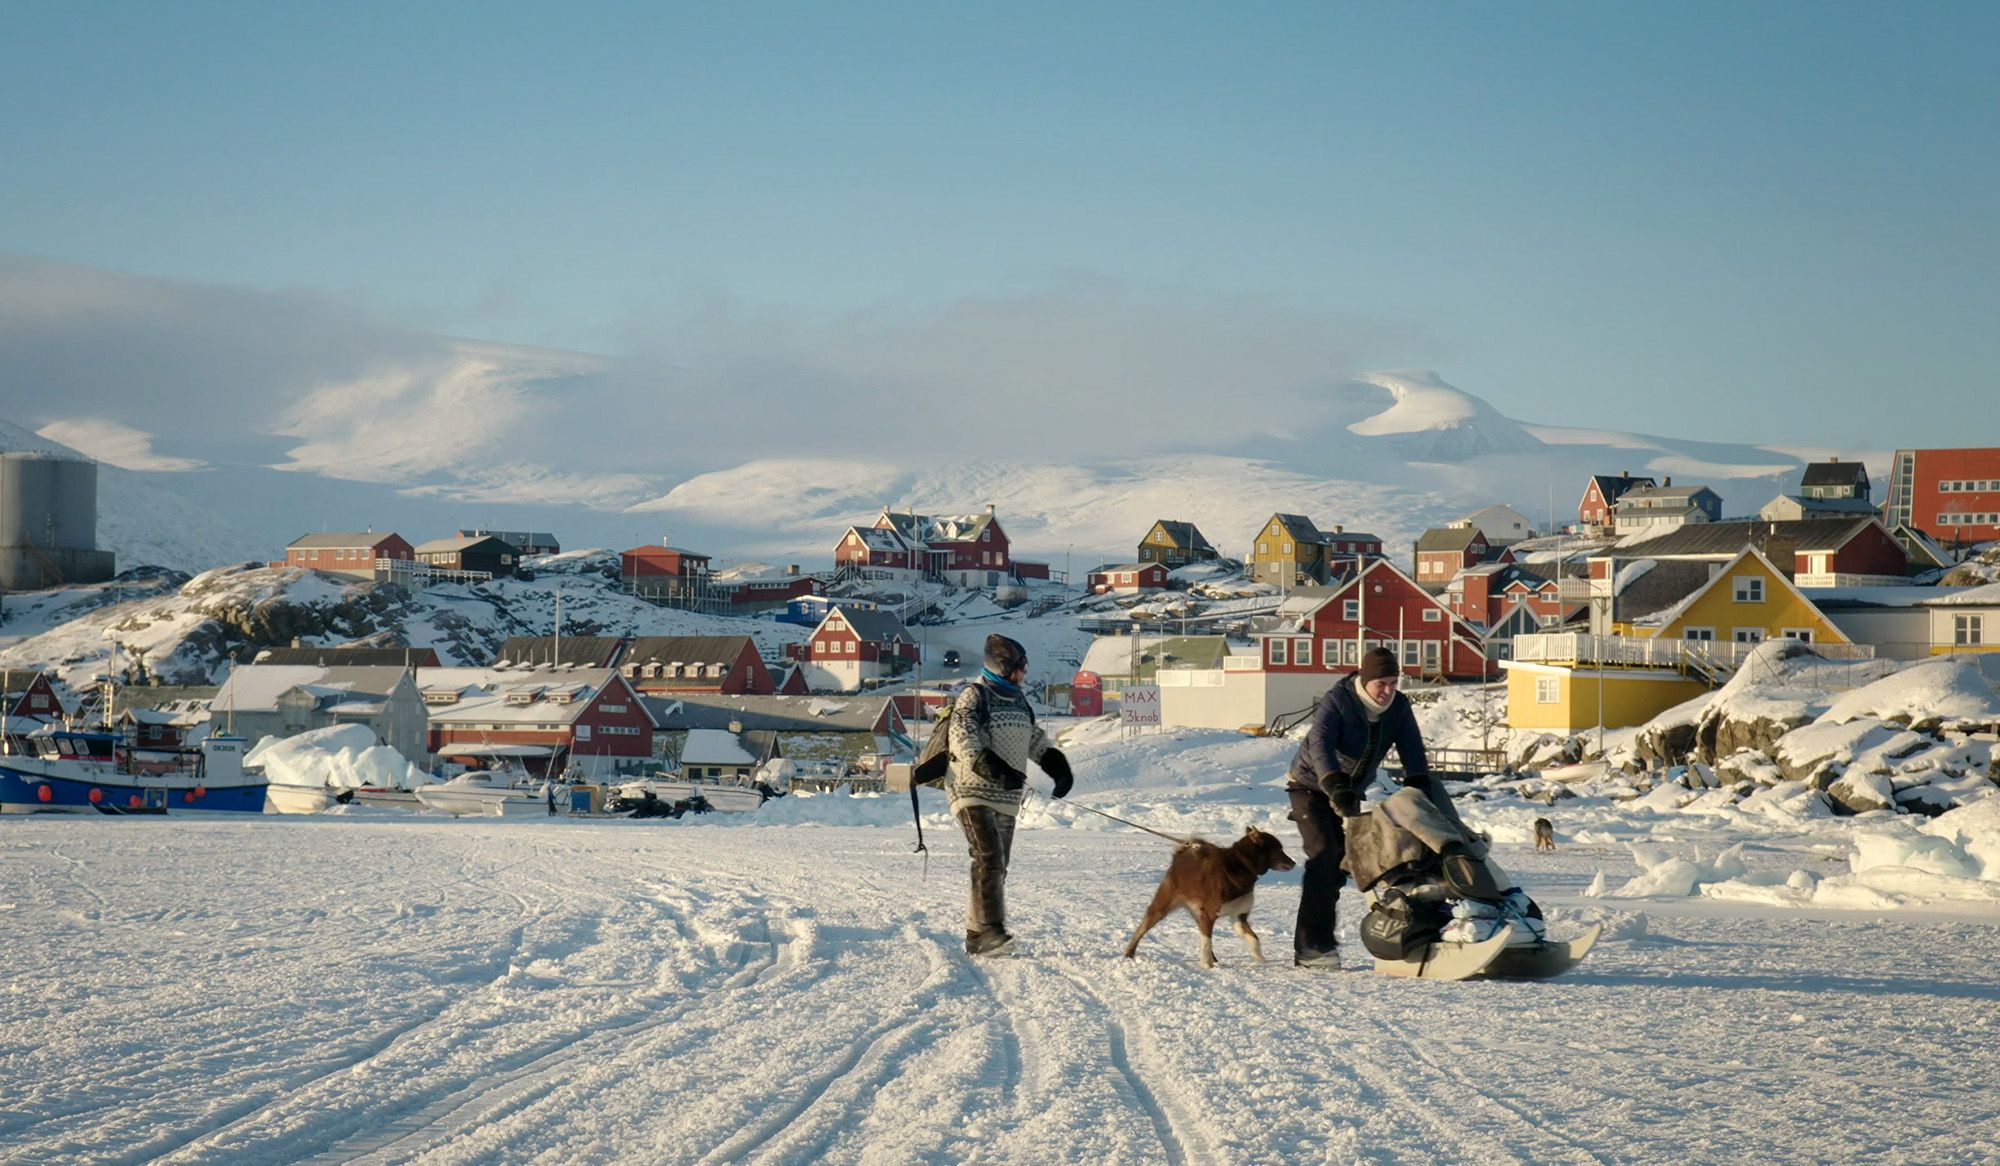 Pierre is French, but loves his adopted home in Greenland. Can he stay? | Psyche